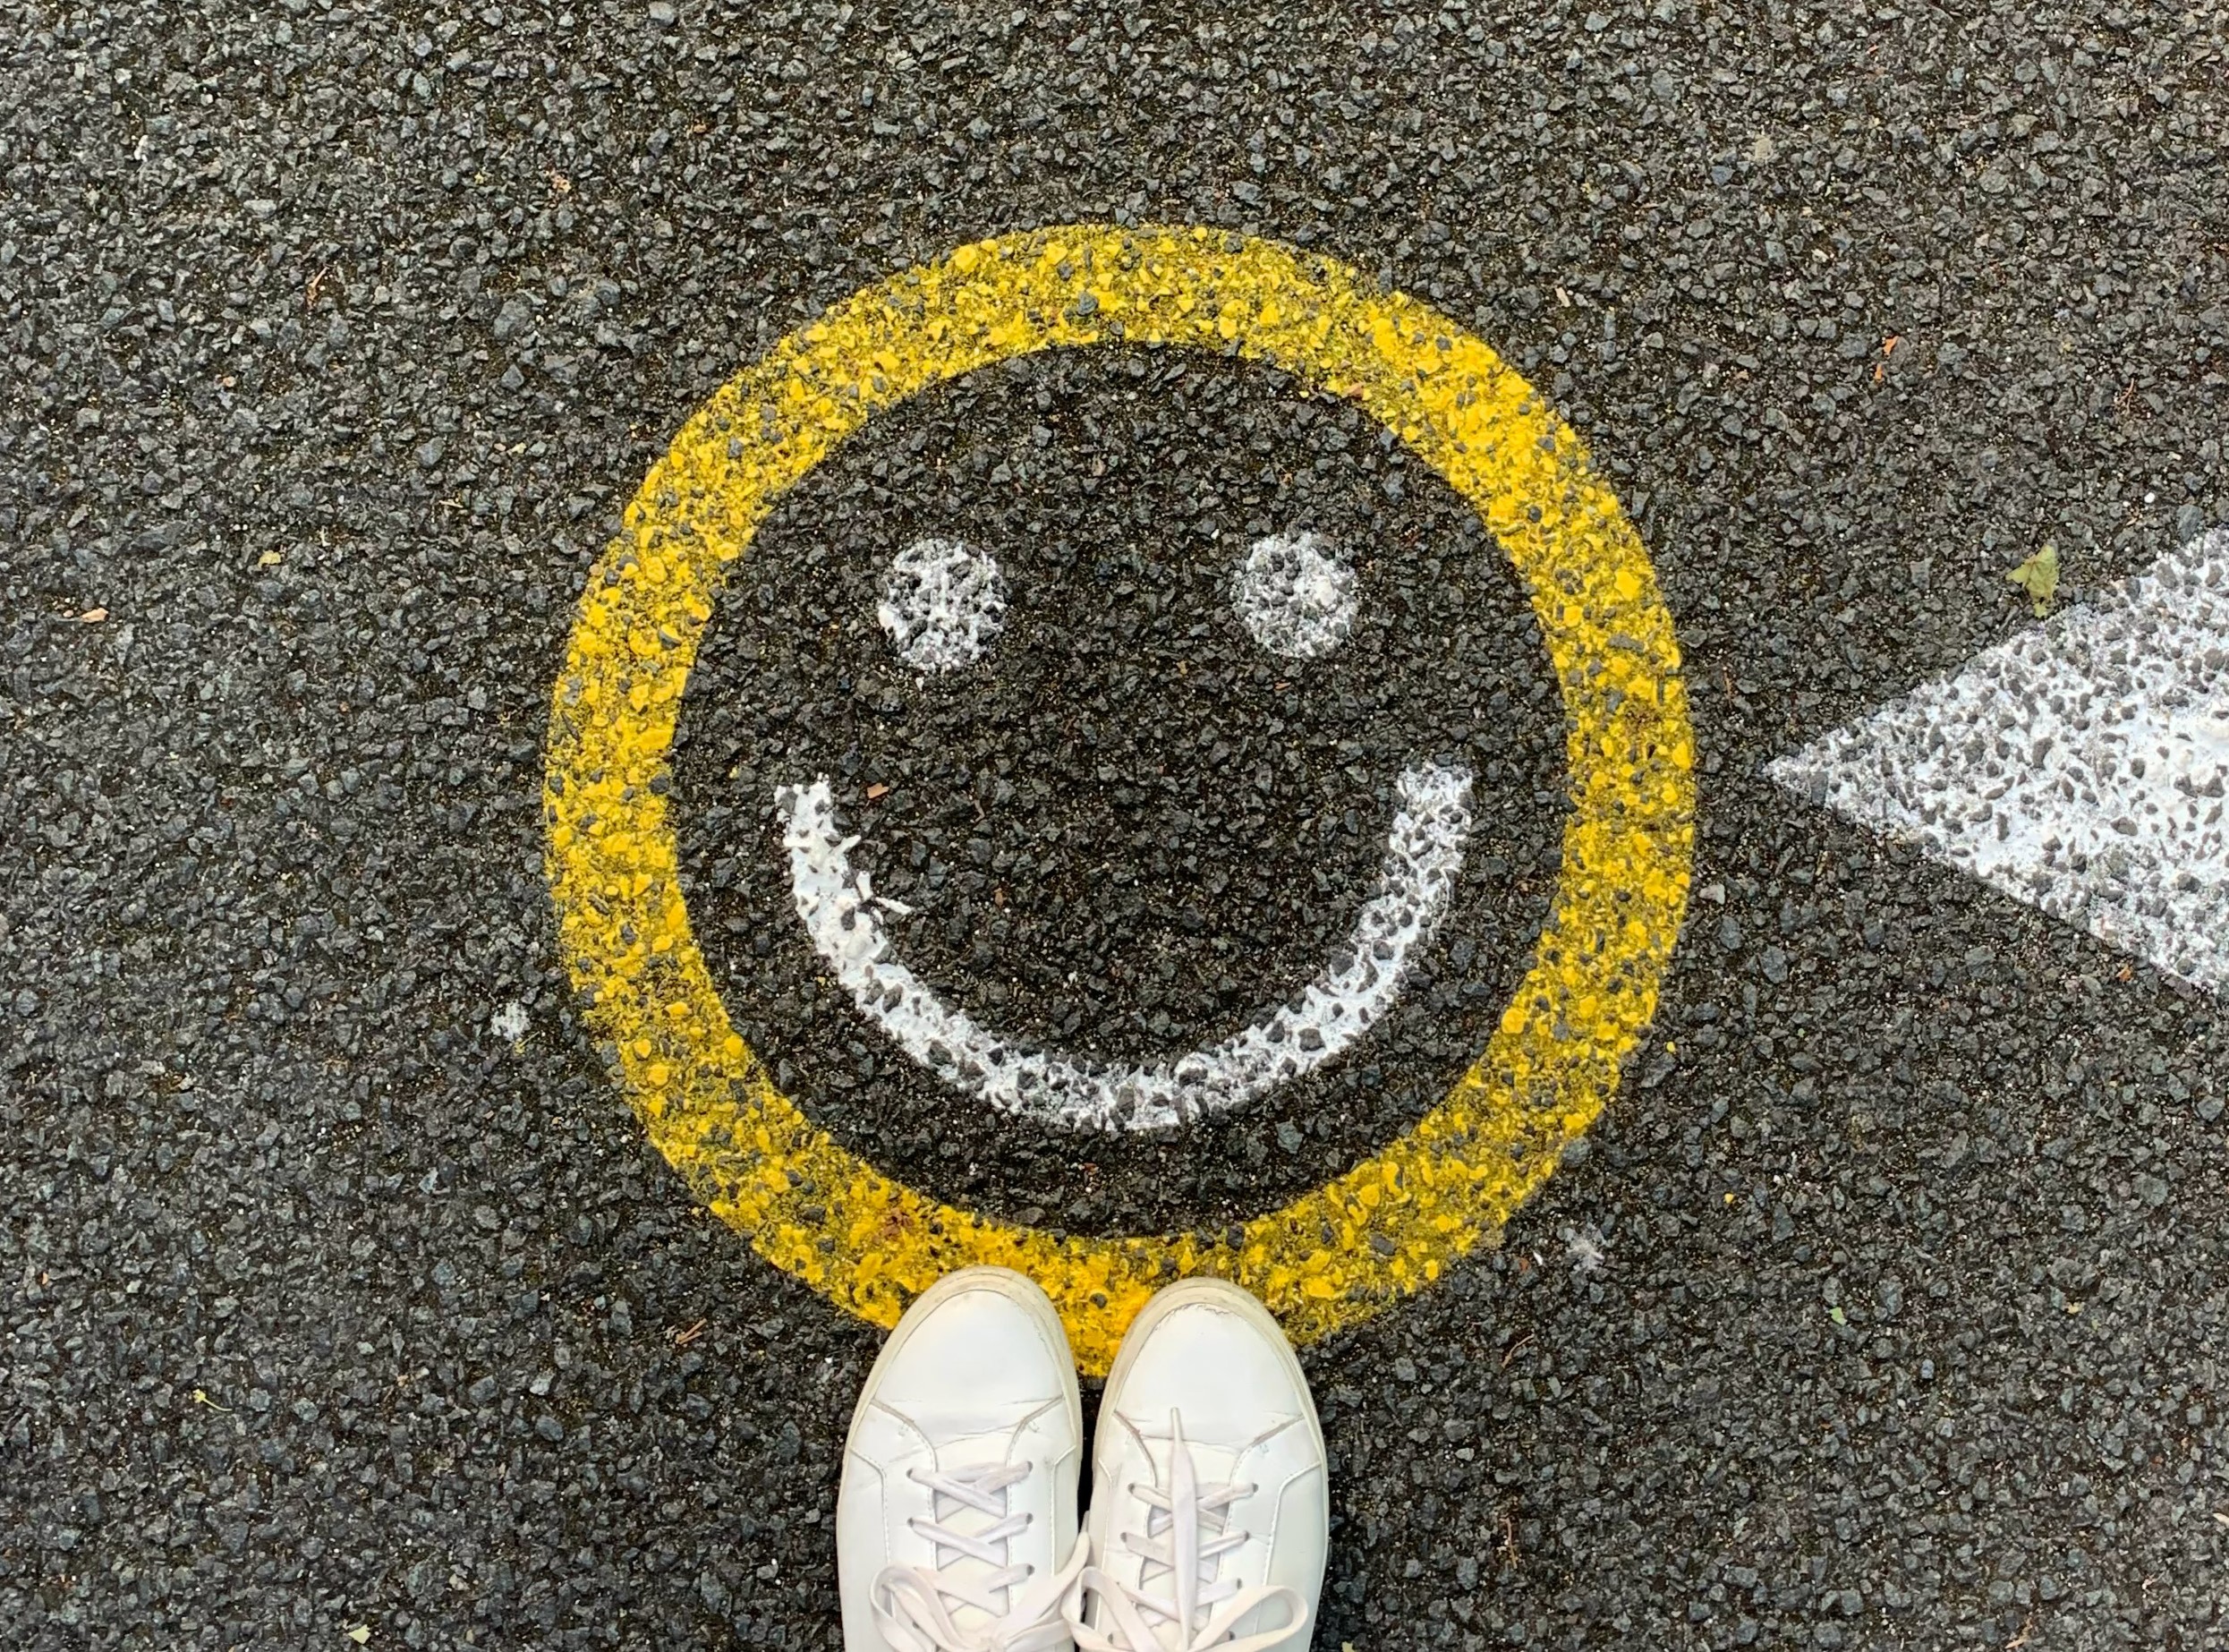 YELLOW CIRCLE WITH WHITE SMILEY FACE INSIDE PAINTED ON ROAD.